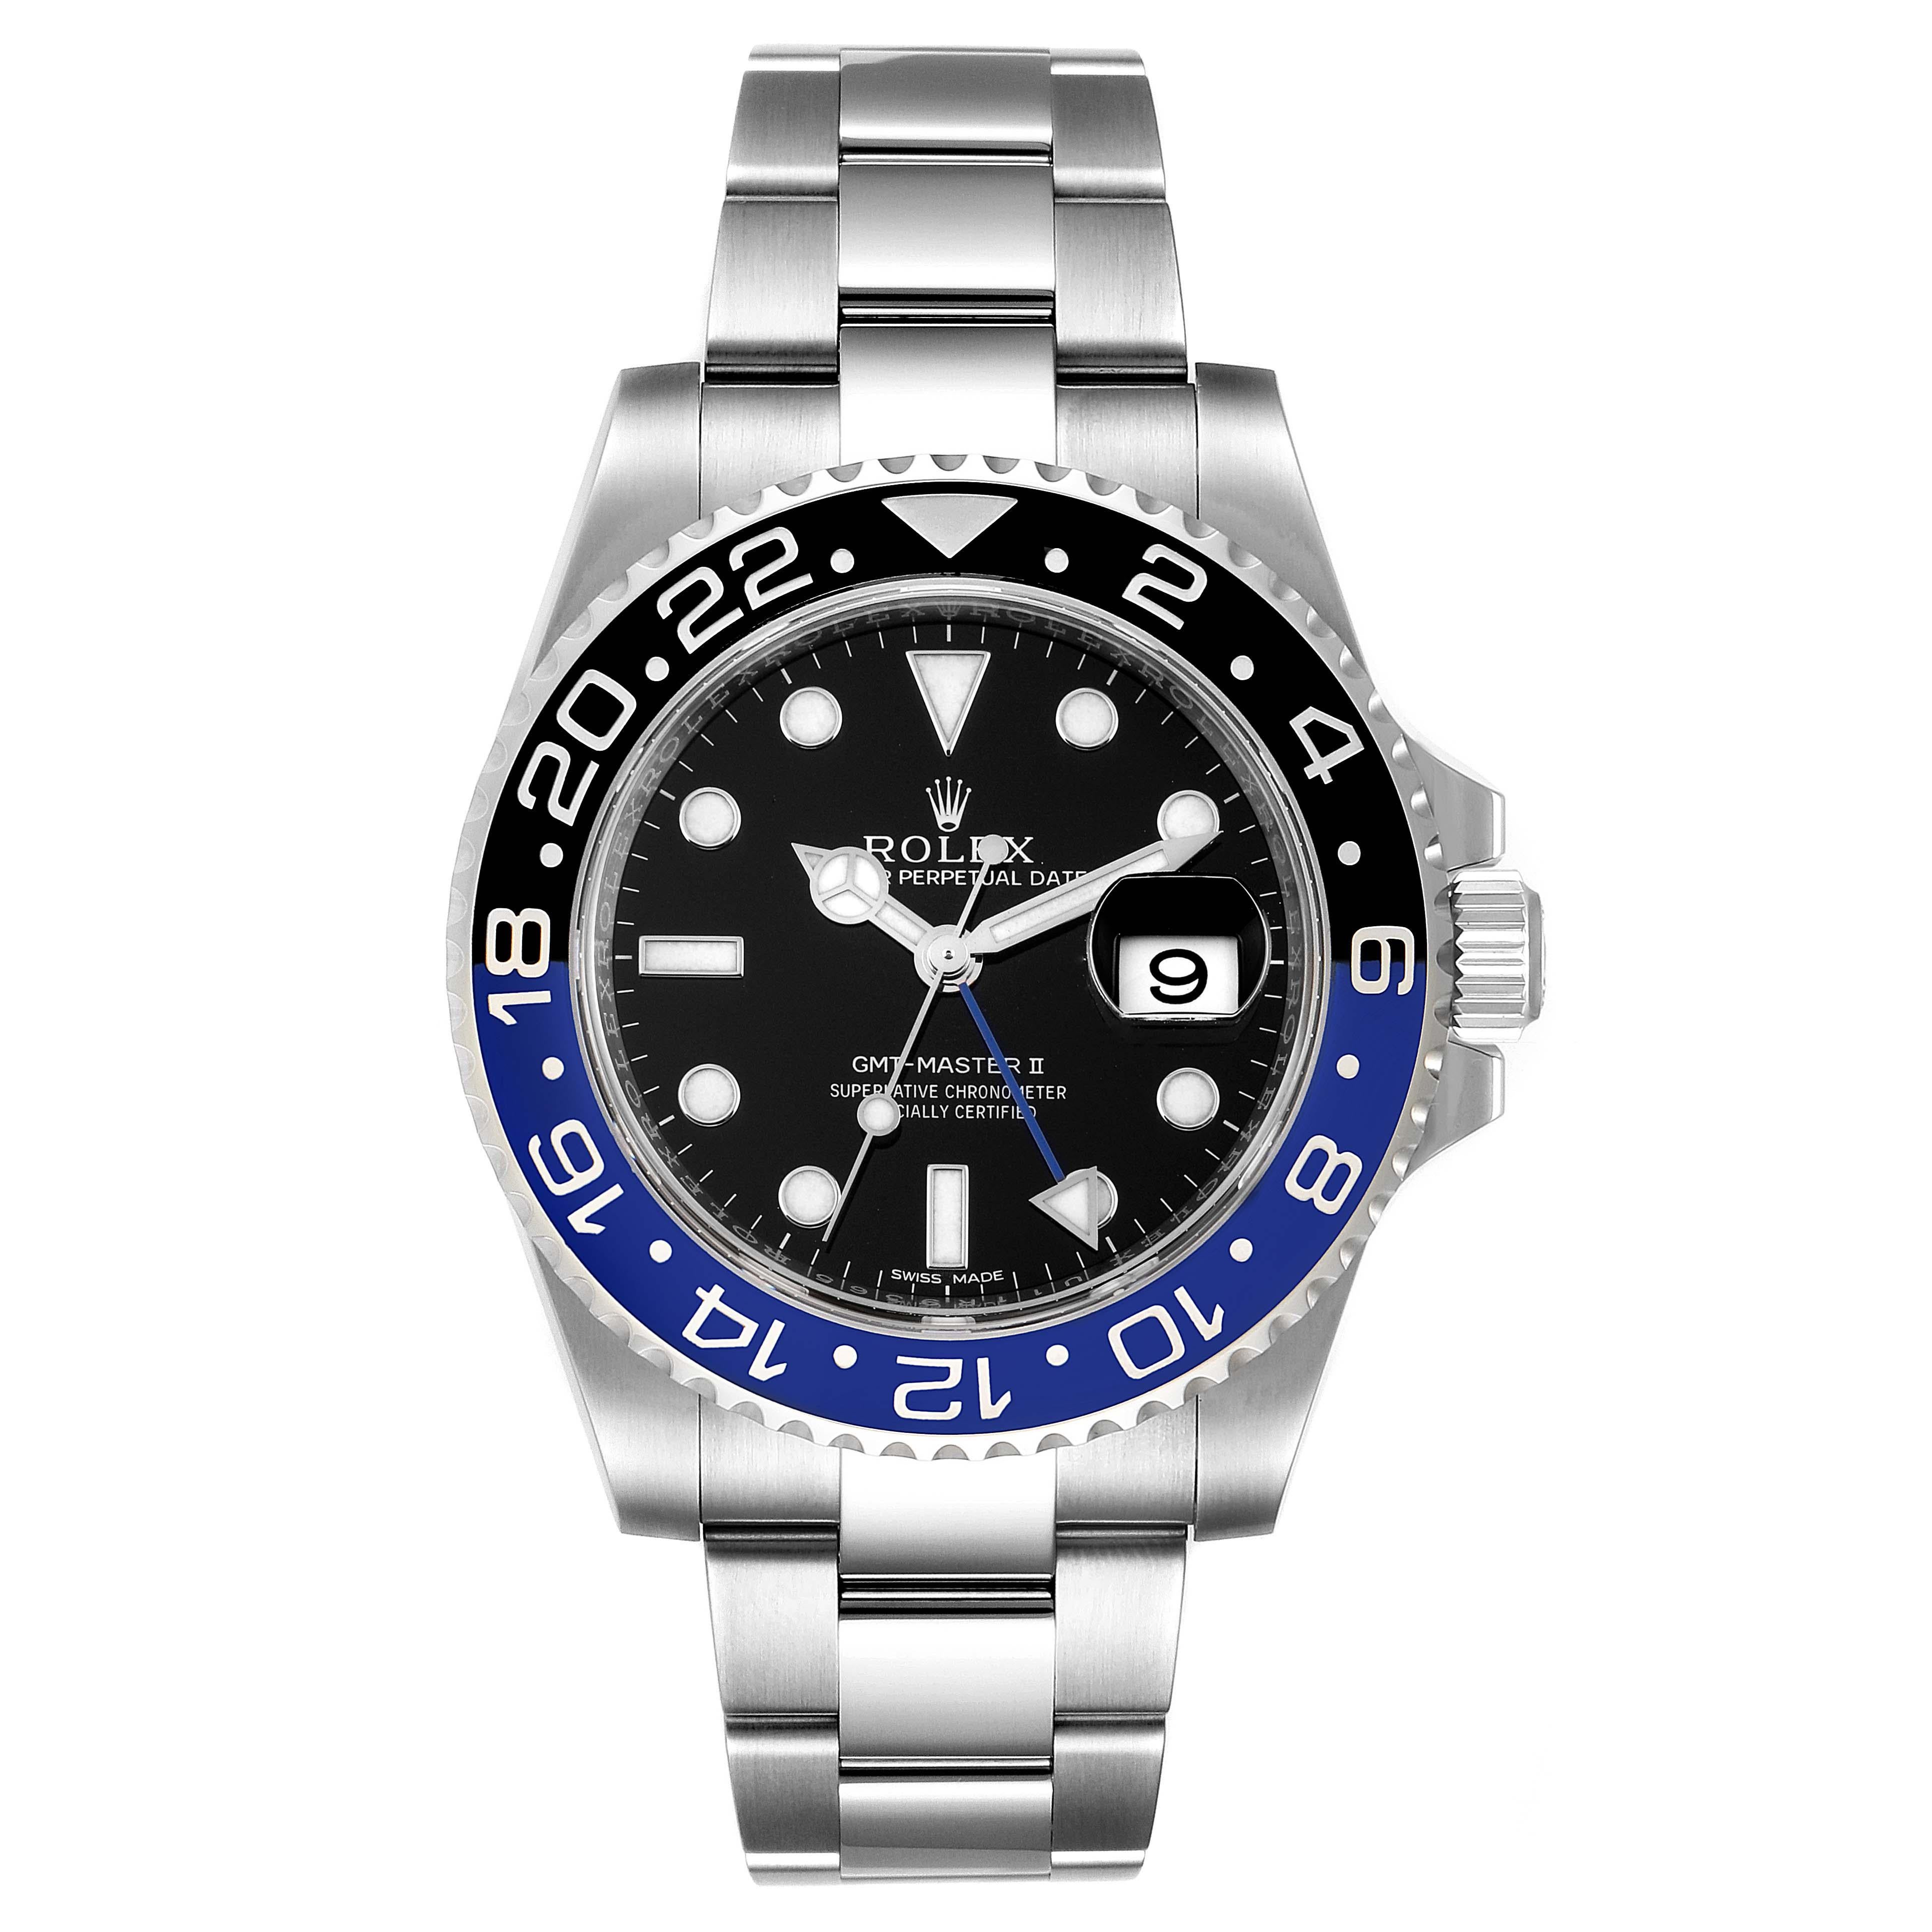 Rolex GMT Master II Batman Blue Black Bezel Steel Watch 116710 Unworn. Officially certified chronometer self-winding movement. Stainless steel case 40.0 mm in diameter. Rolex logo on a crown. Stainless steel black and blue bidirectional rotating